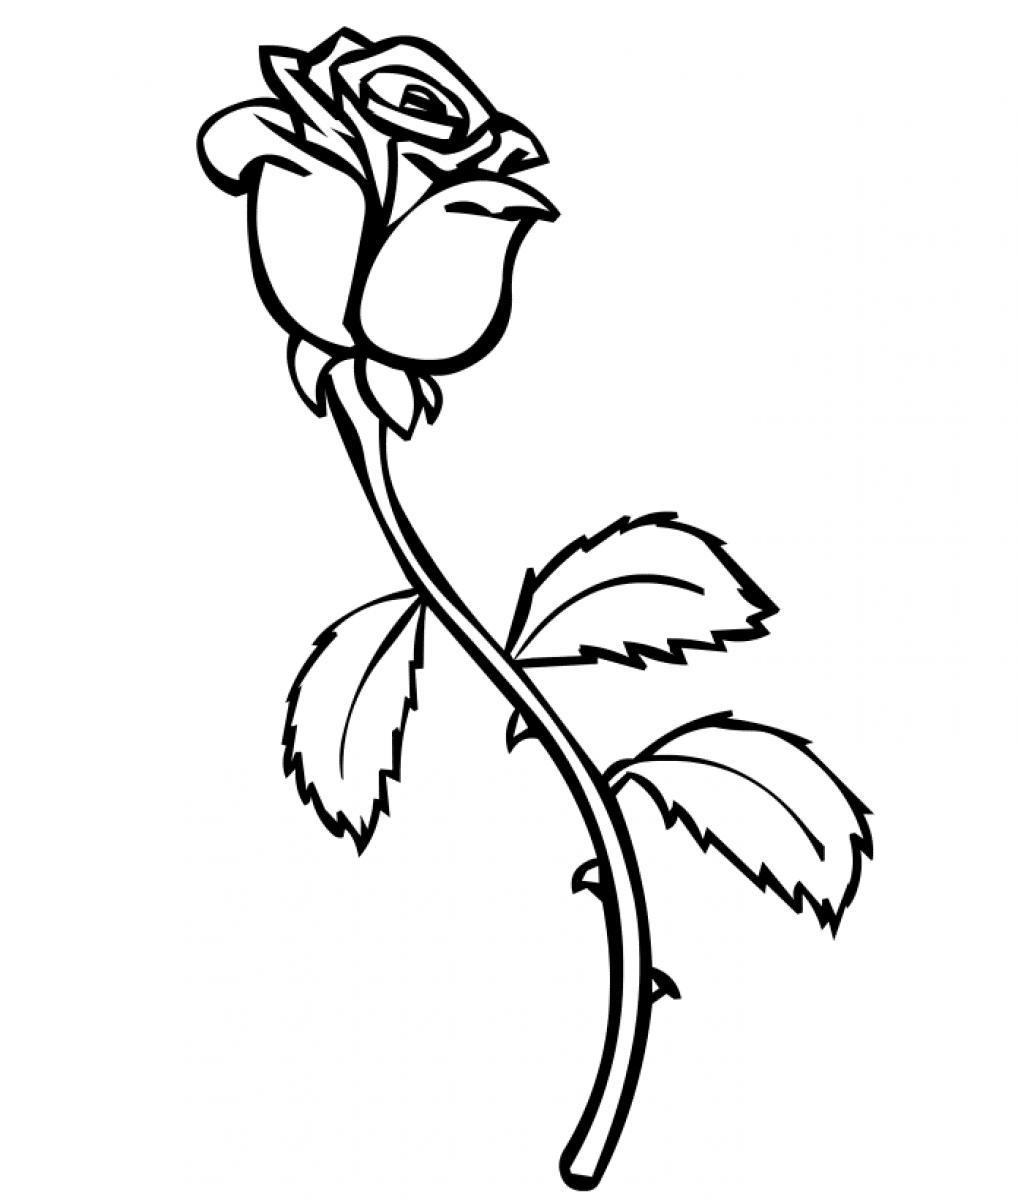 Free Printable Roses Coloring Pages For Kids - Free Printable Roses